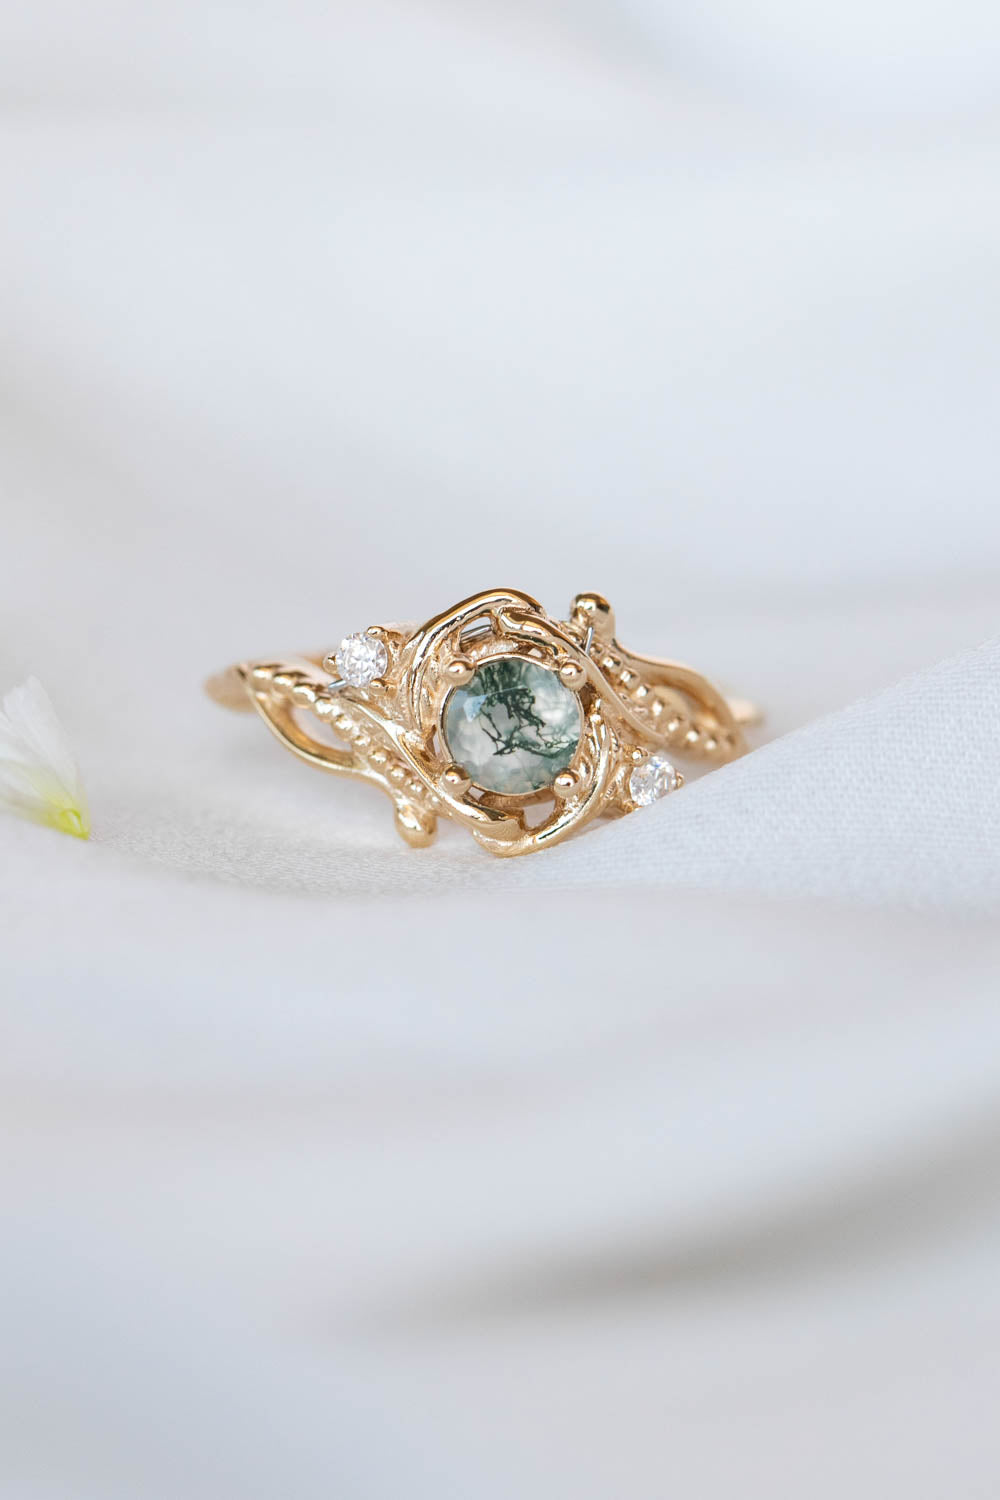 Round moss agate engagement ring with diamonds, nature themed gold ring / Undina - Eden Garden Jewelry™